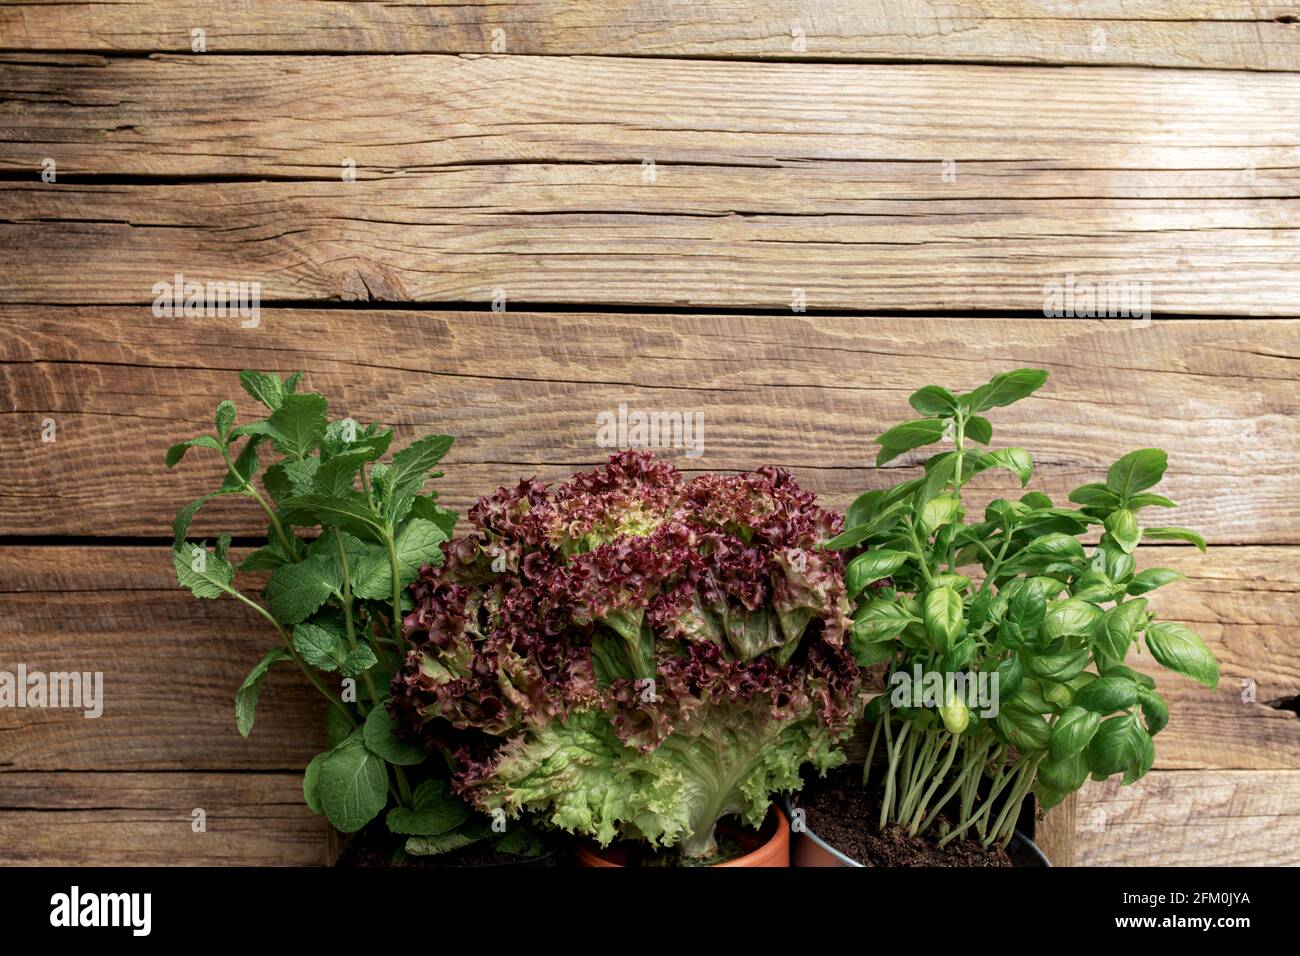 Gardening and healthy eating concept with different herbs and salad leaves on wooden background Stock Photo